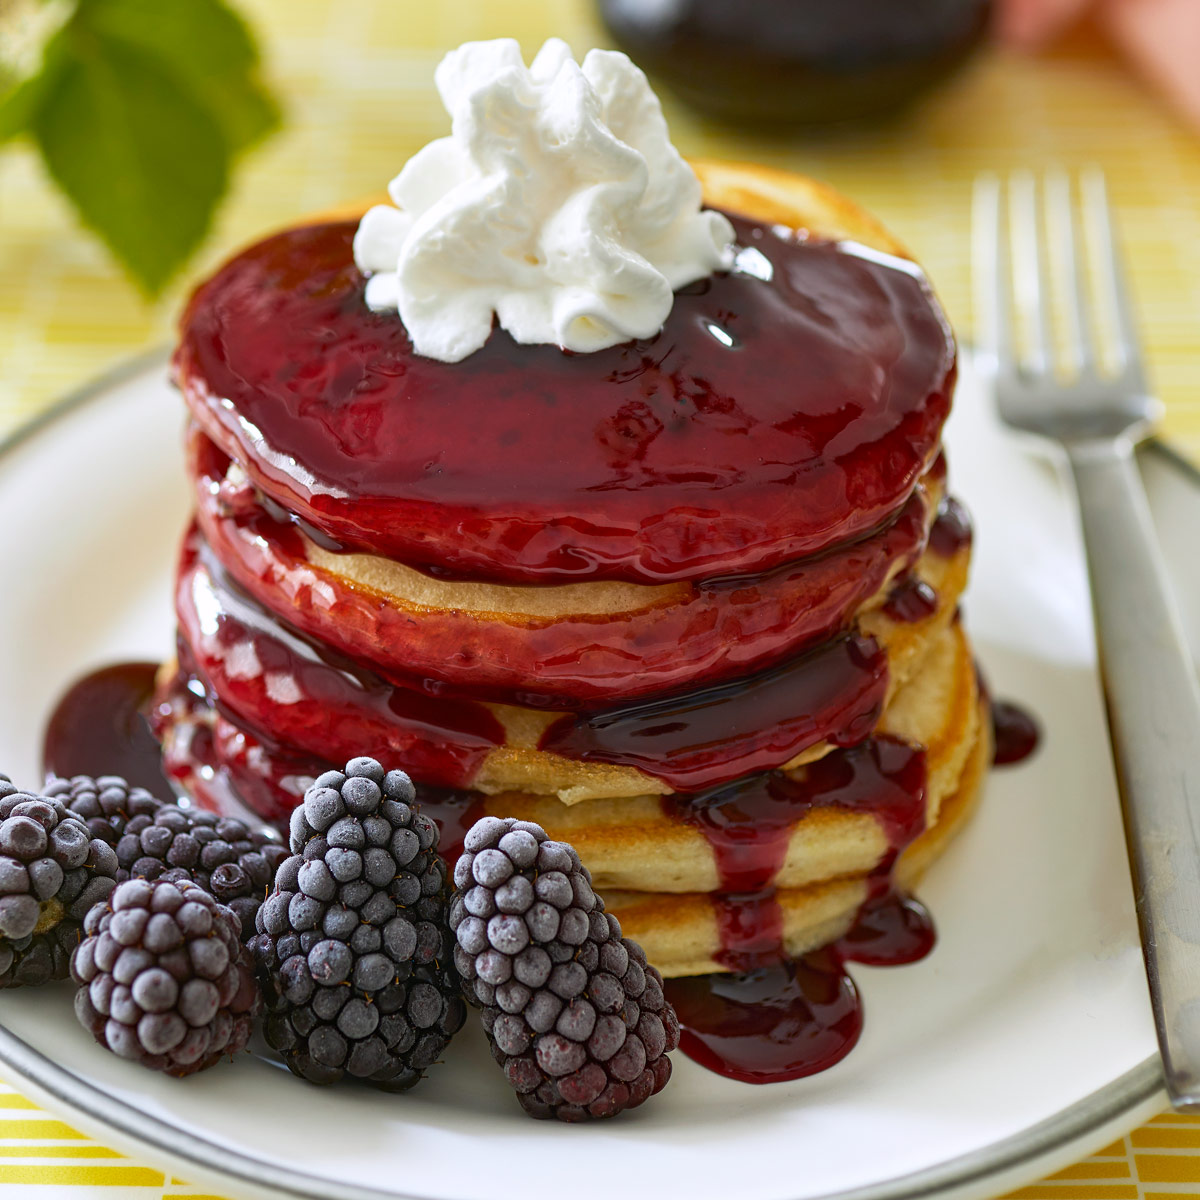 Stack of pancakes with blackberry syrup dripping down.